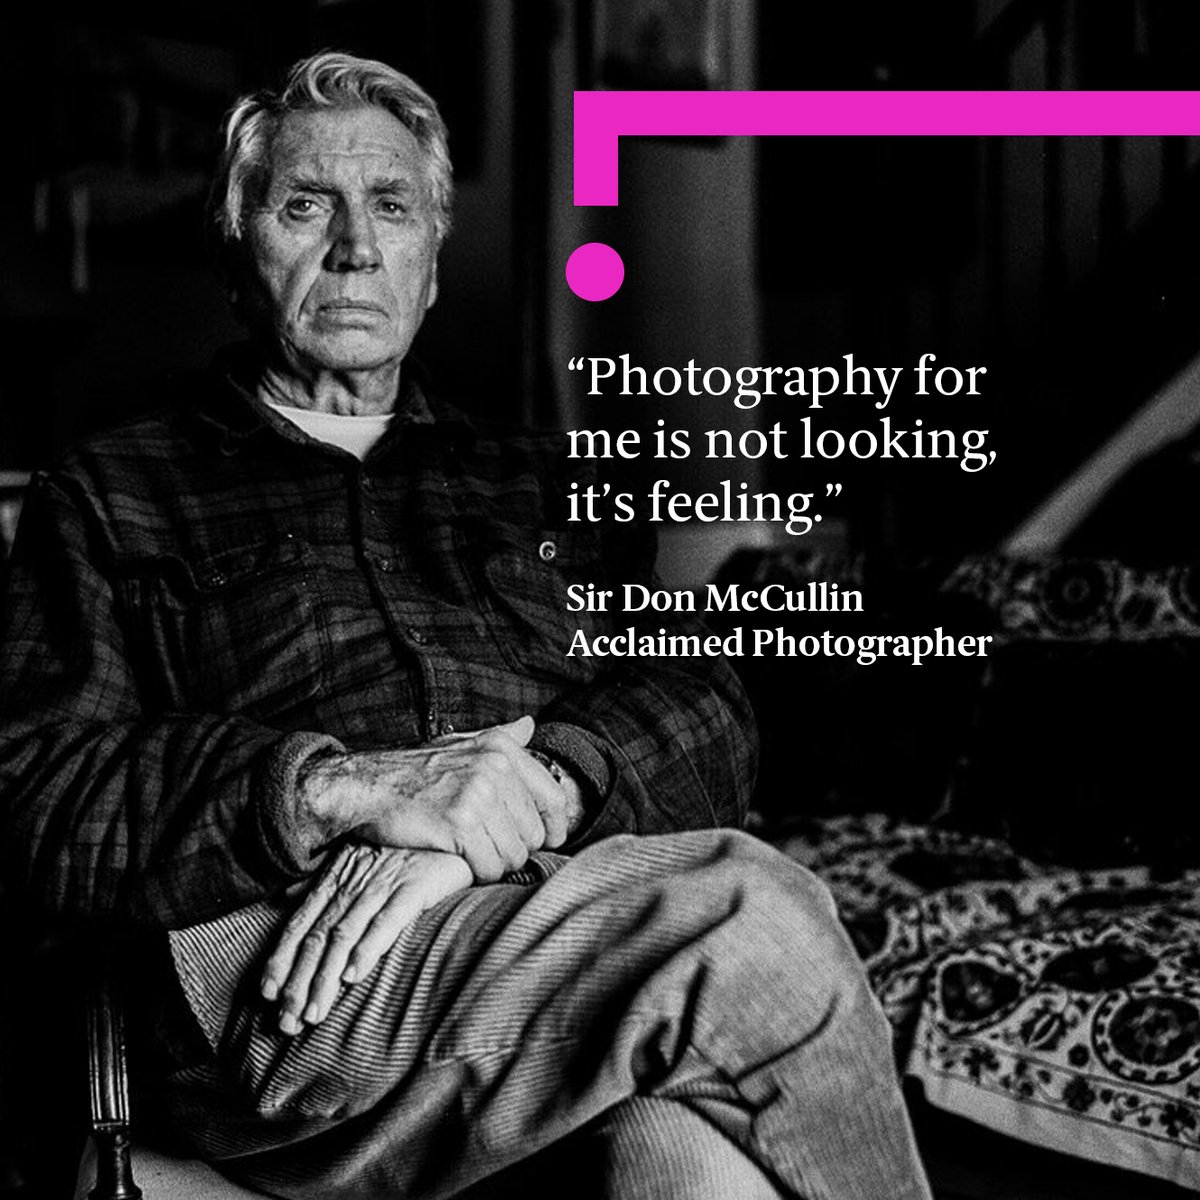 “Photography for me is not looking, it’s feeling.”
In an interview with @TinaBrownLM  at #SirHarrySummit on 15 May, legendary photojournalist Sir Don McCullin will reflect on the futility of violence and how he has “sentenced himself to peace.”
Tune into the livestream: